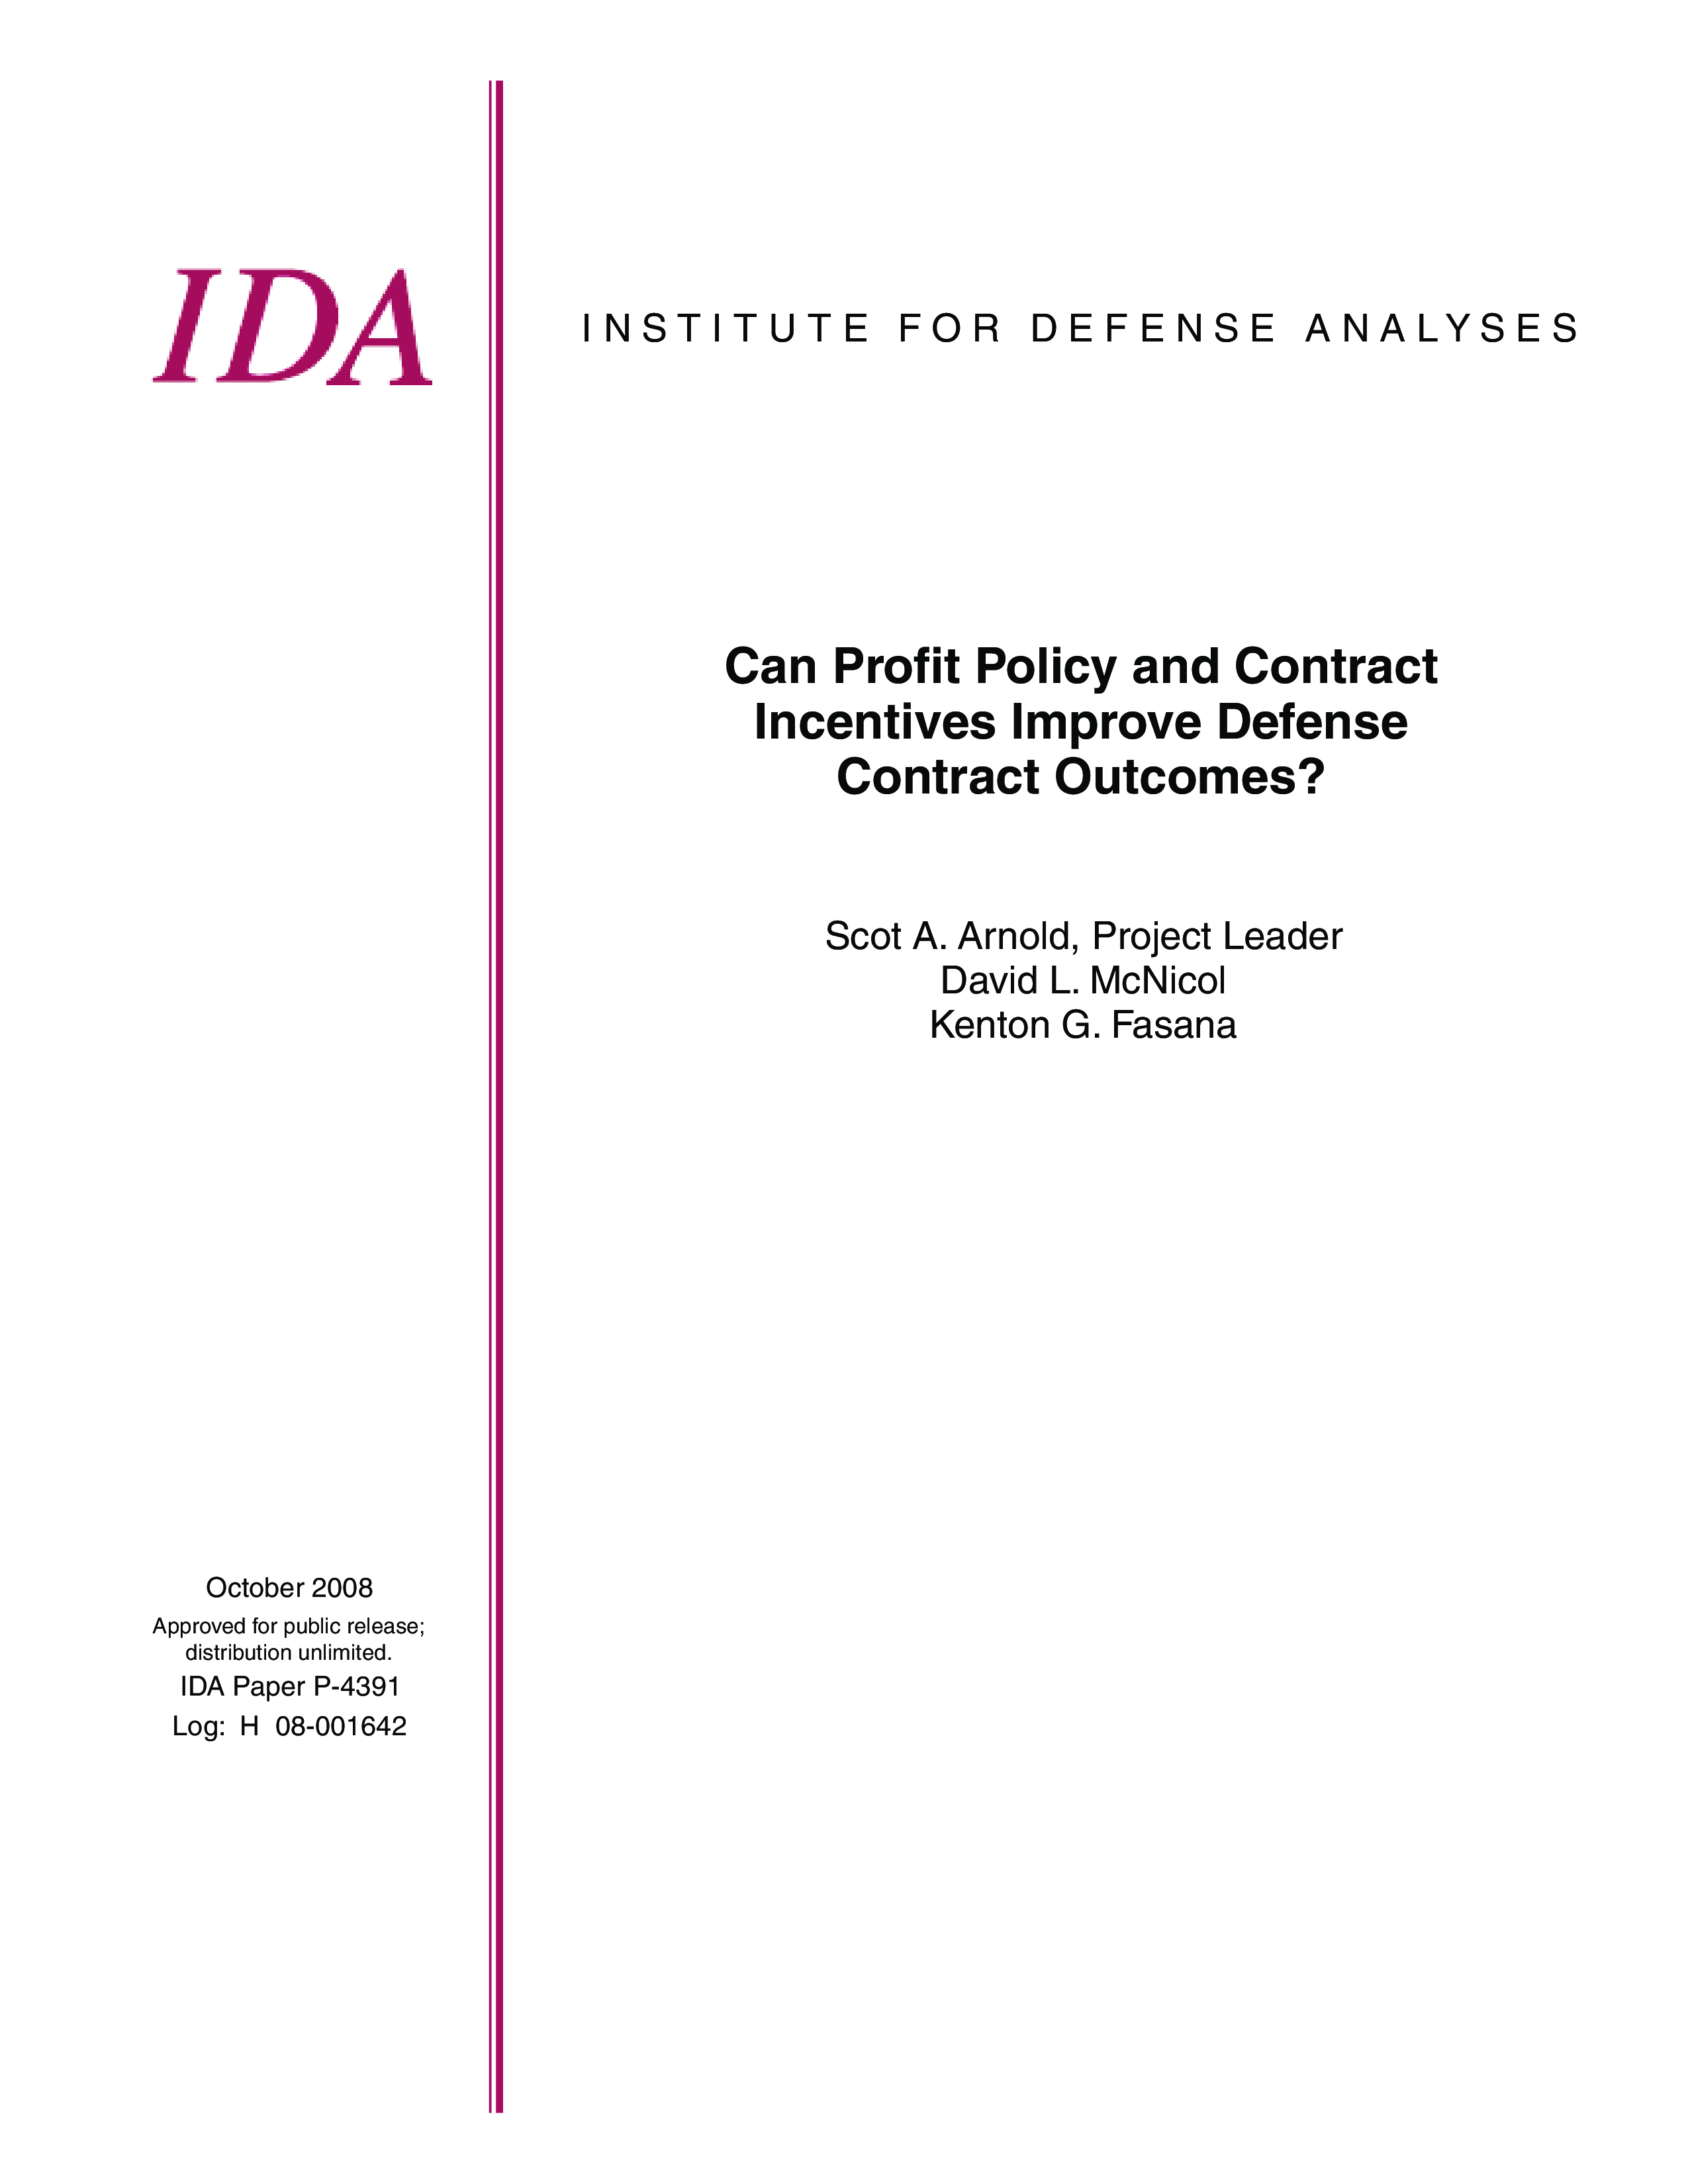 Can Profit Policy and Contract Incentives Improve Defense Contract Outcomes? 